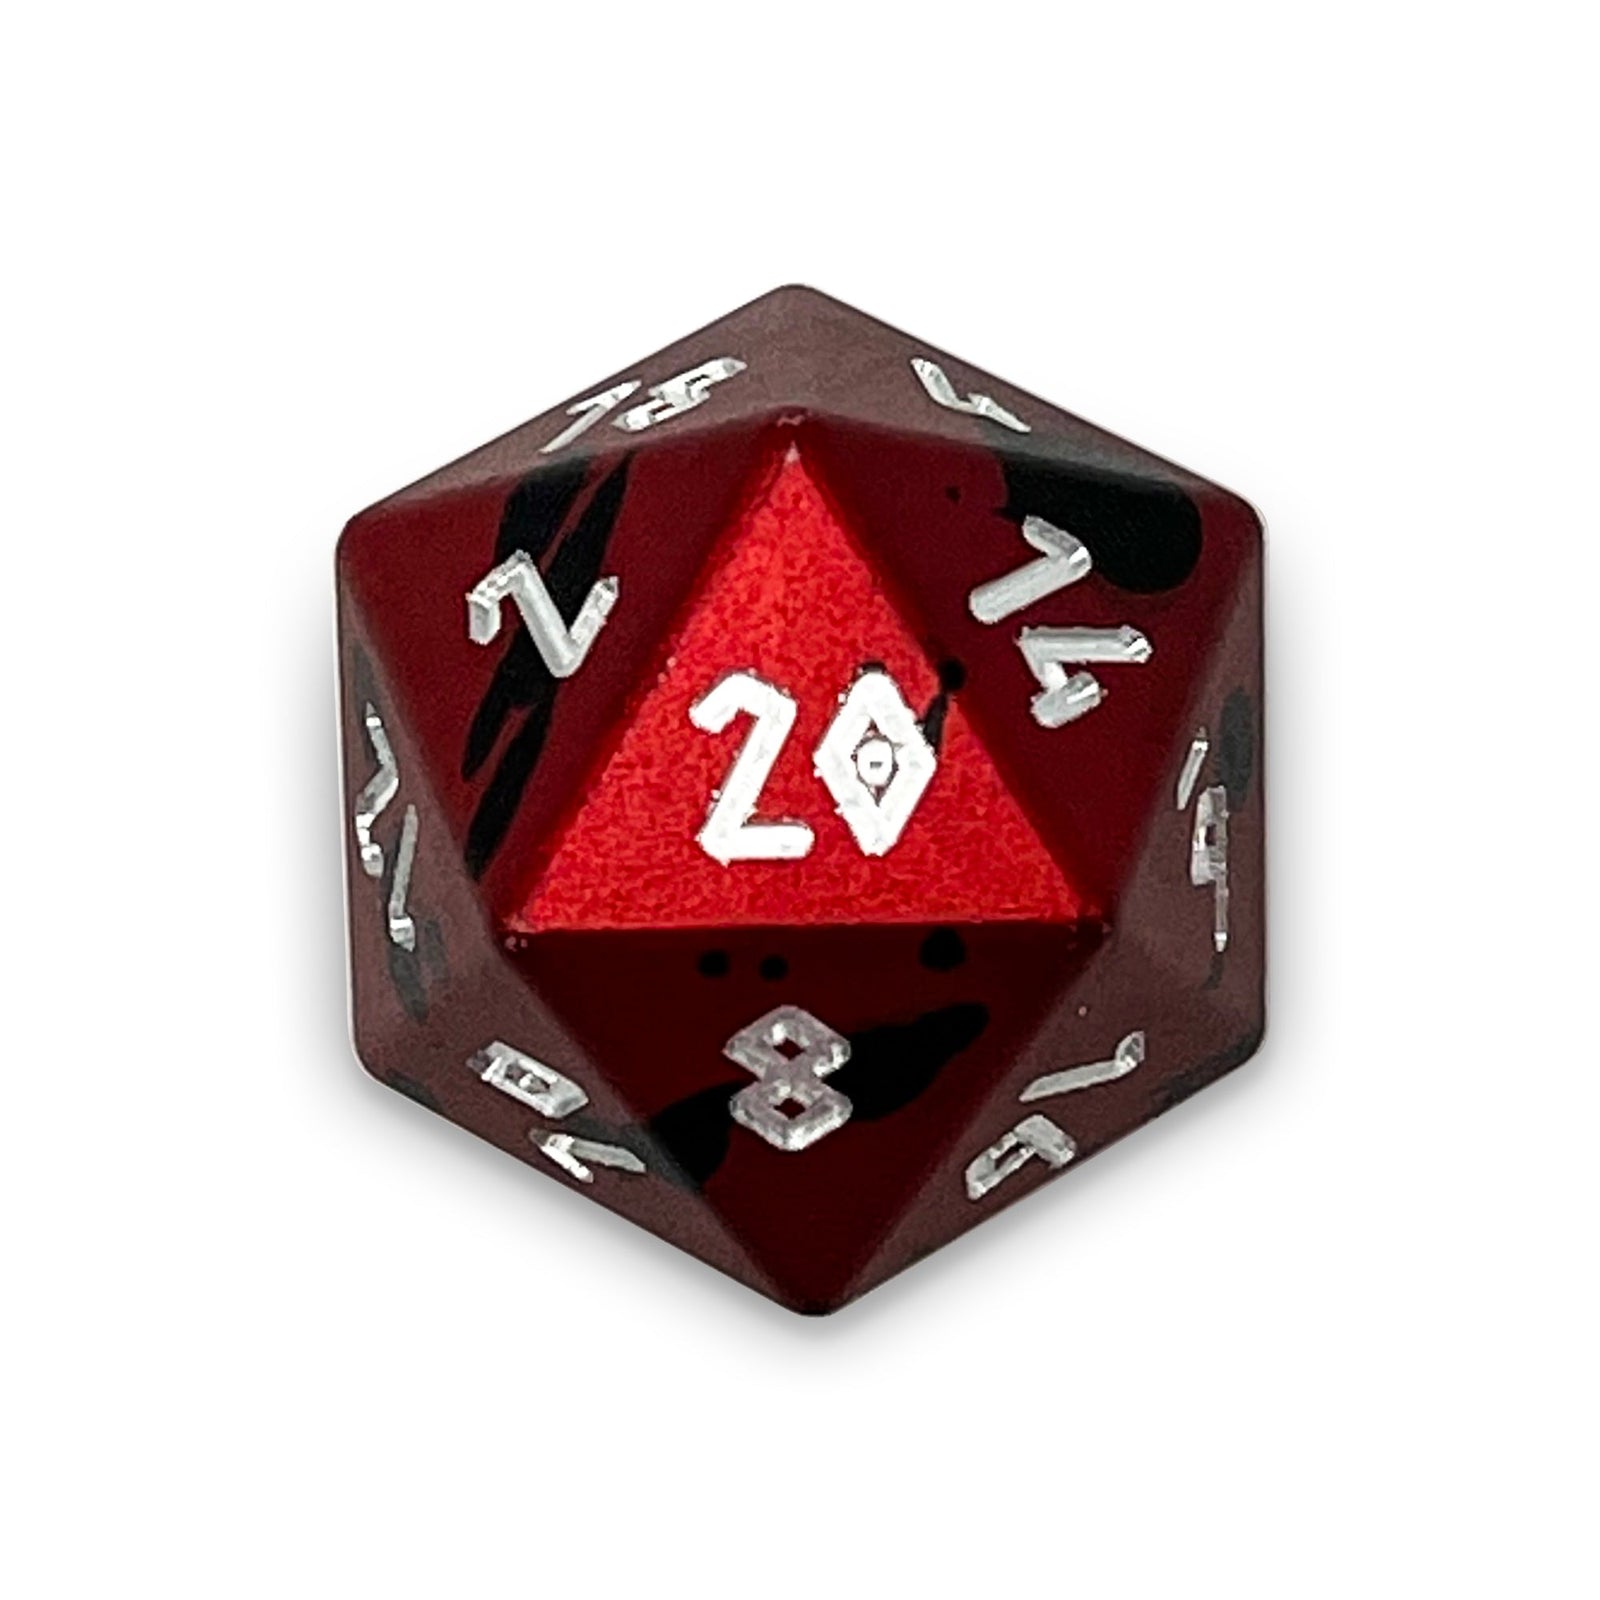 Single Wondrous Dice® D20 in Berserker's Frenzy by Norse Foundry - NOR 02393